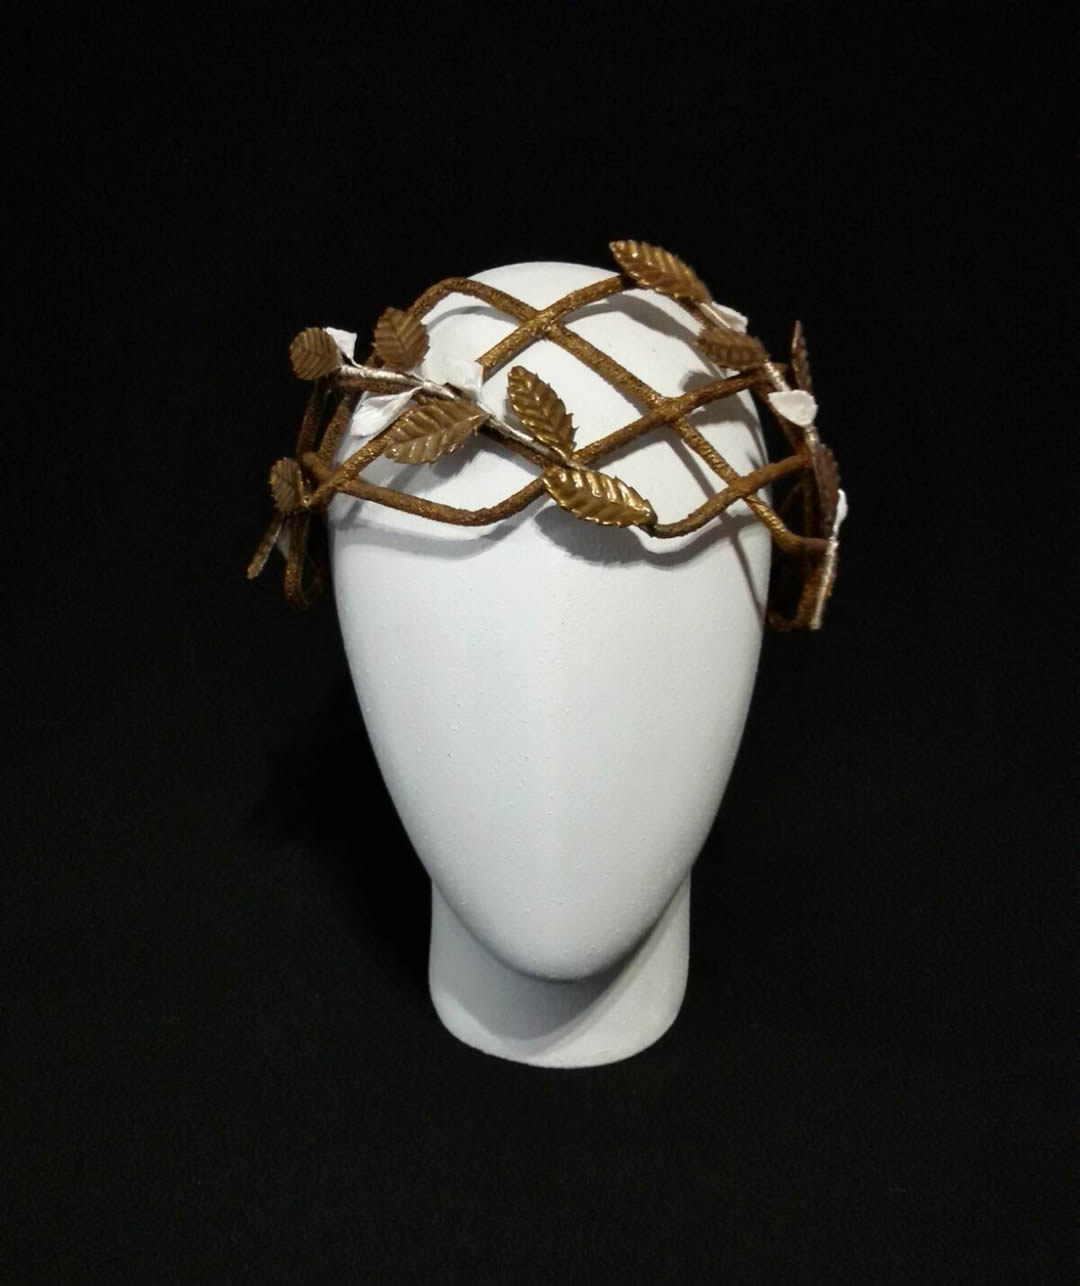 Wired fascinator with porcelain flowers and leaves